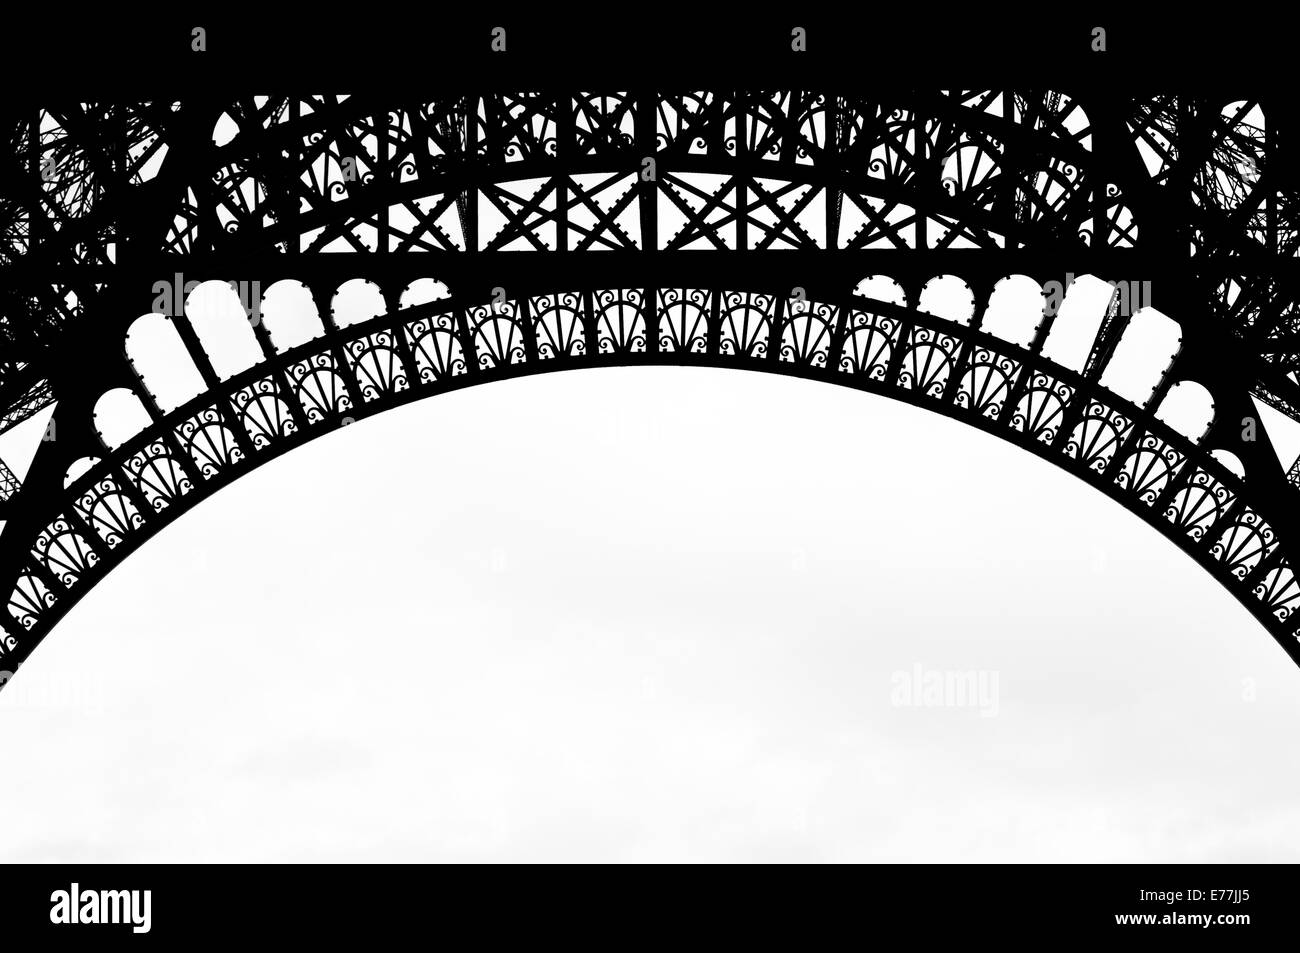 A black and white photo of the lattice/iron work of the Eiffel Tower, Paris France. Stock Photo